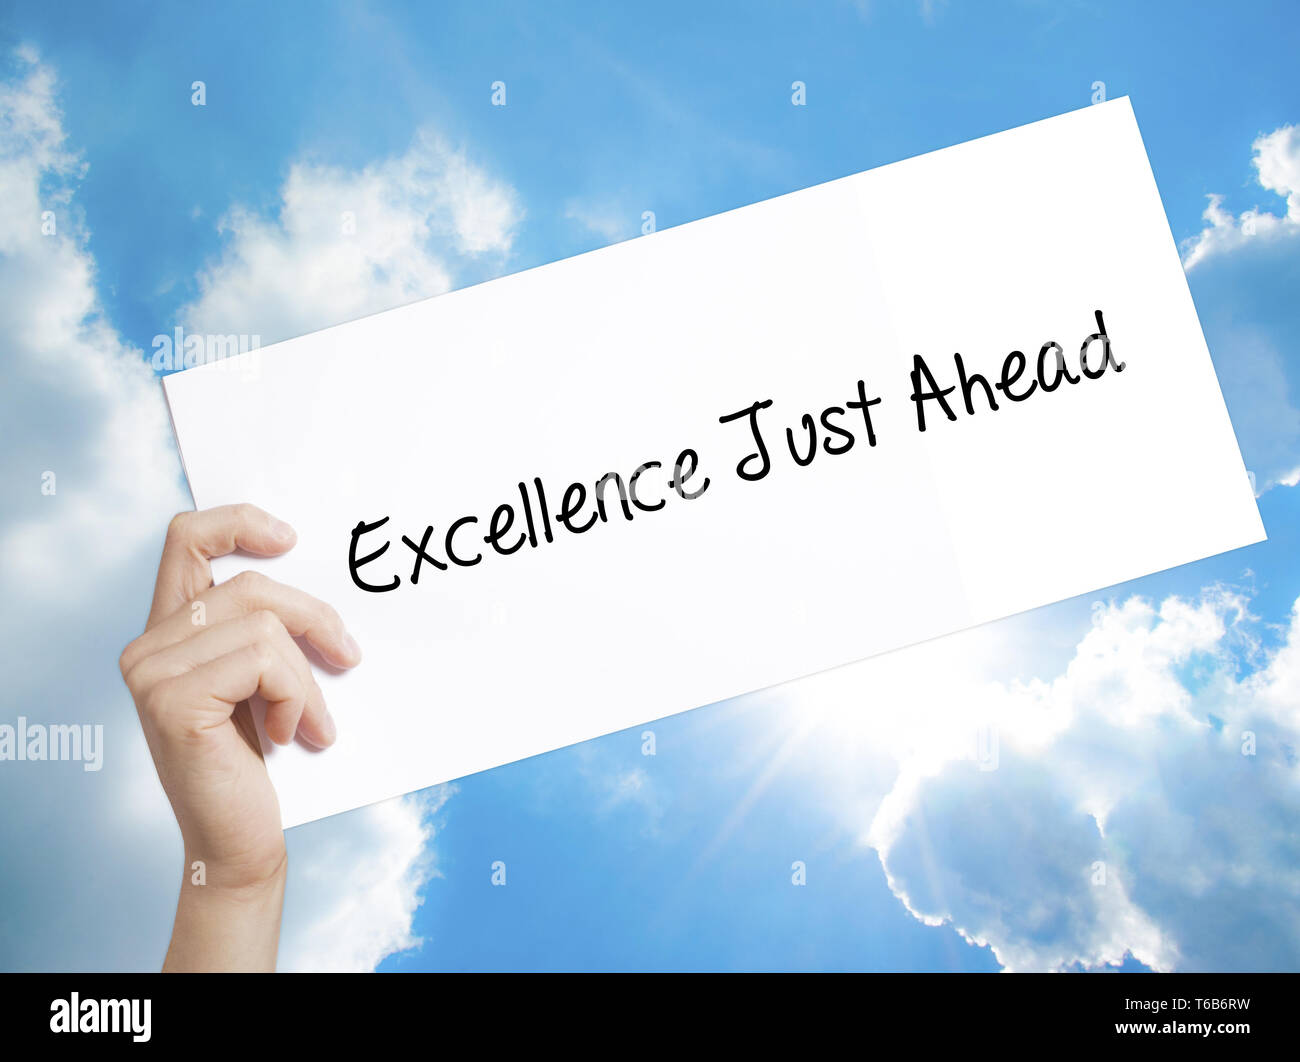 Excellence Just Ahead Sign on white paper. Man Hand Holding Paper with text. Isolated on sky background Stock Photo